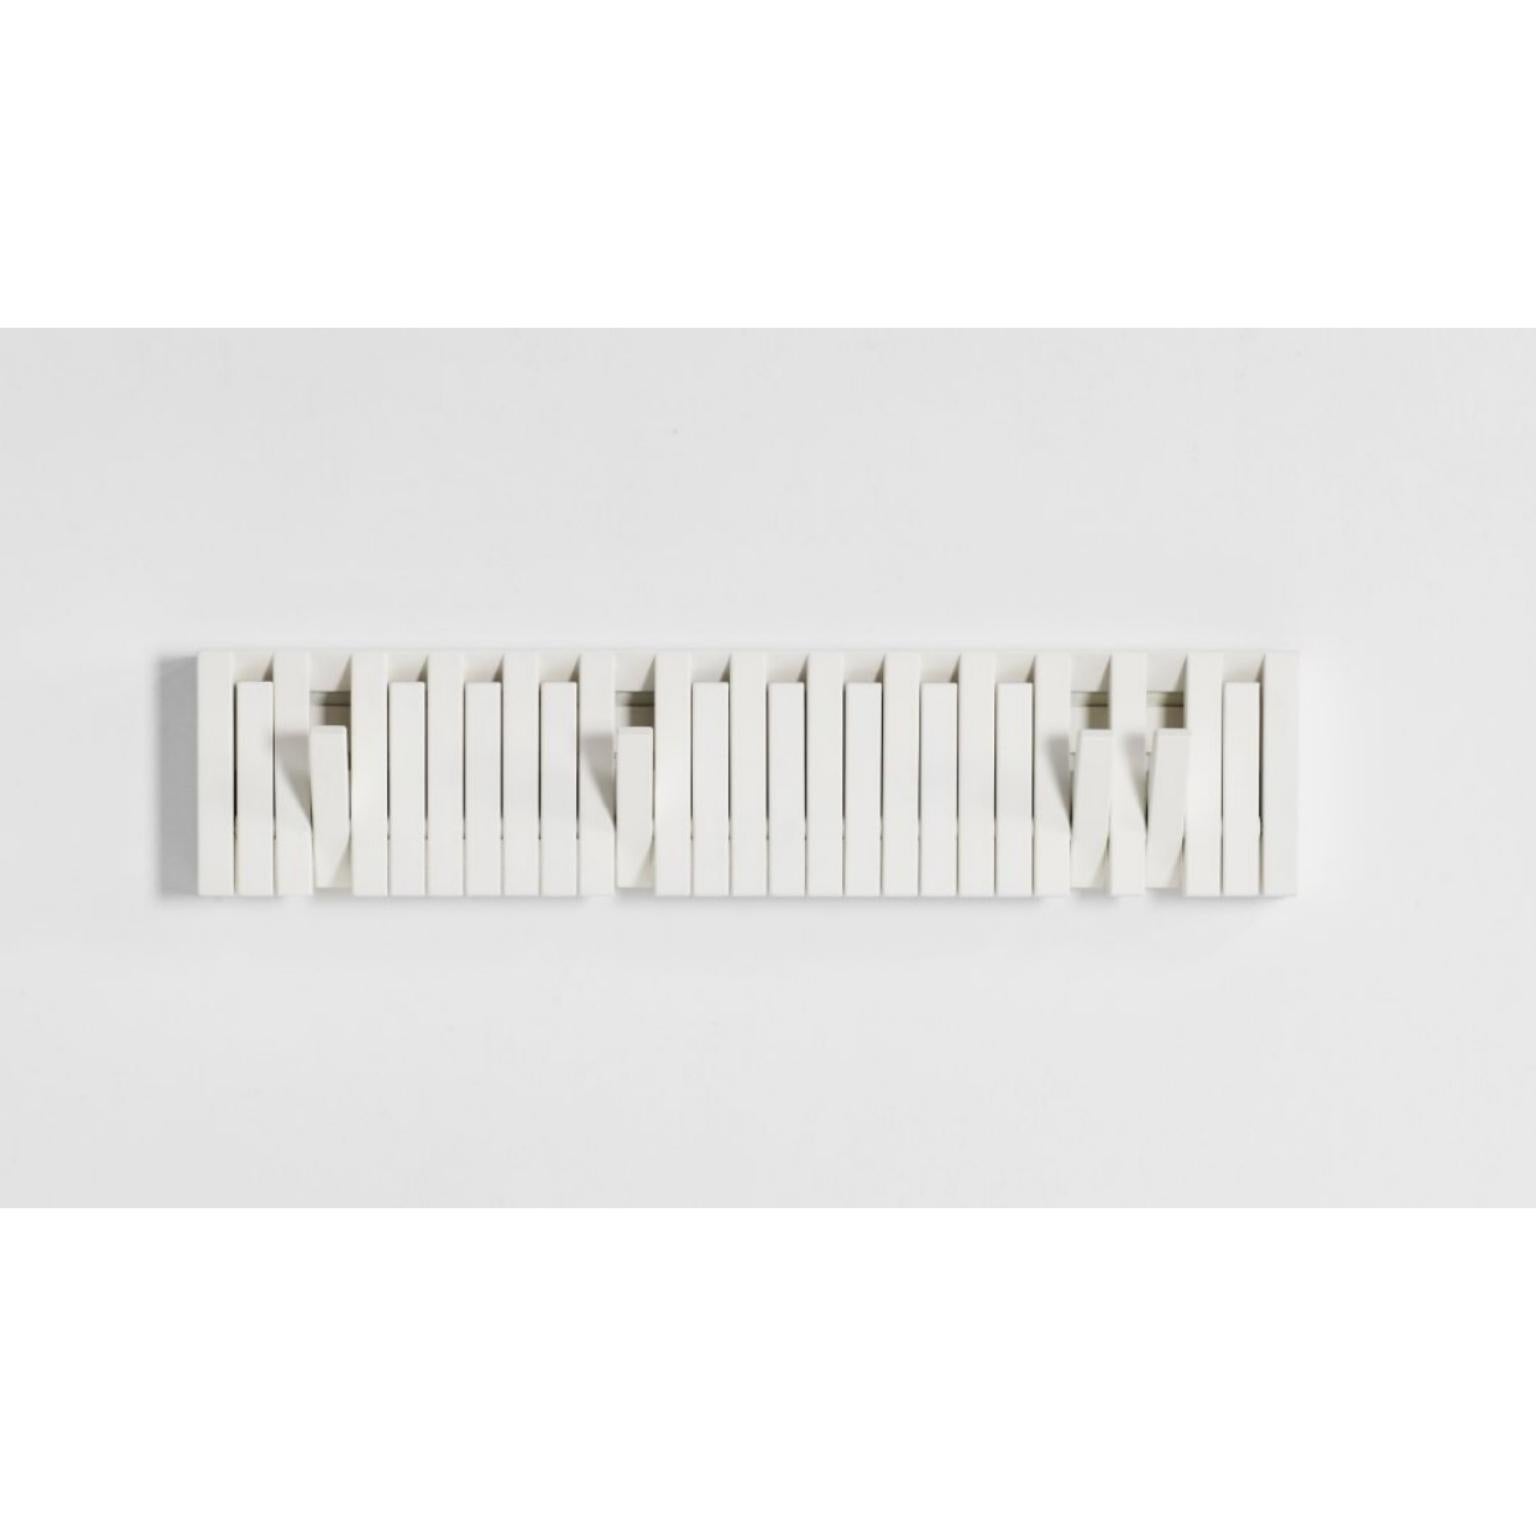 Xylo coat rack by Patrick Séha.
Dimensions: 81 x H 20 cm
Materials: Beech lacquered white.

Available in various wood finishes.

The XYLO is a wall-mounted coat rack with foldable hooks, inspired by the PIANO hanger panel designed by Patrick